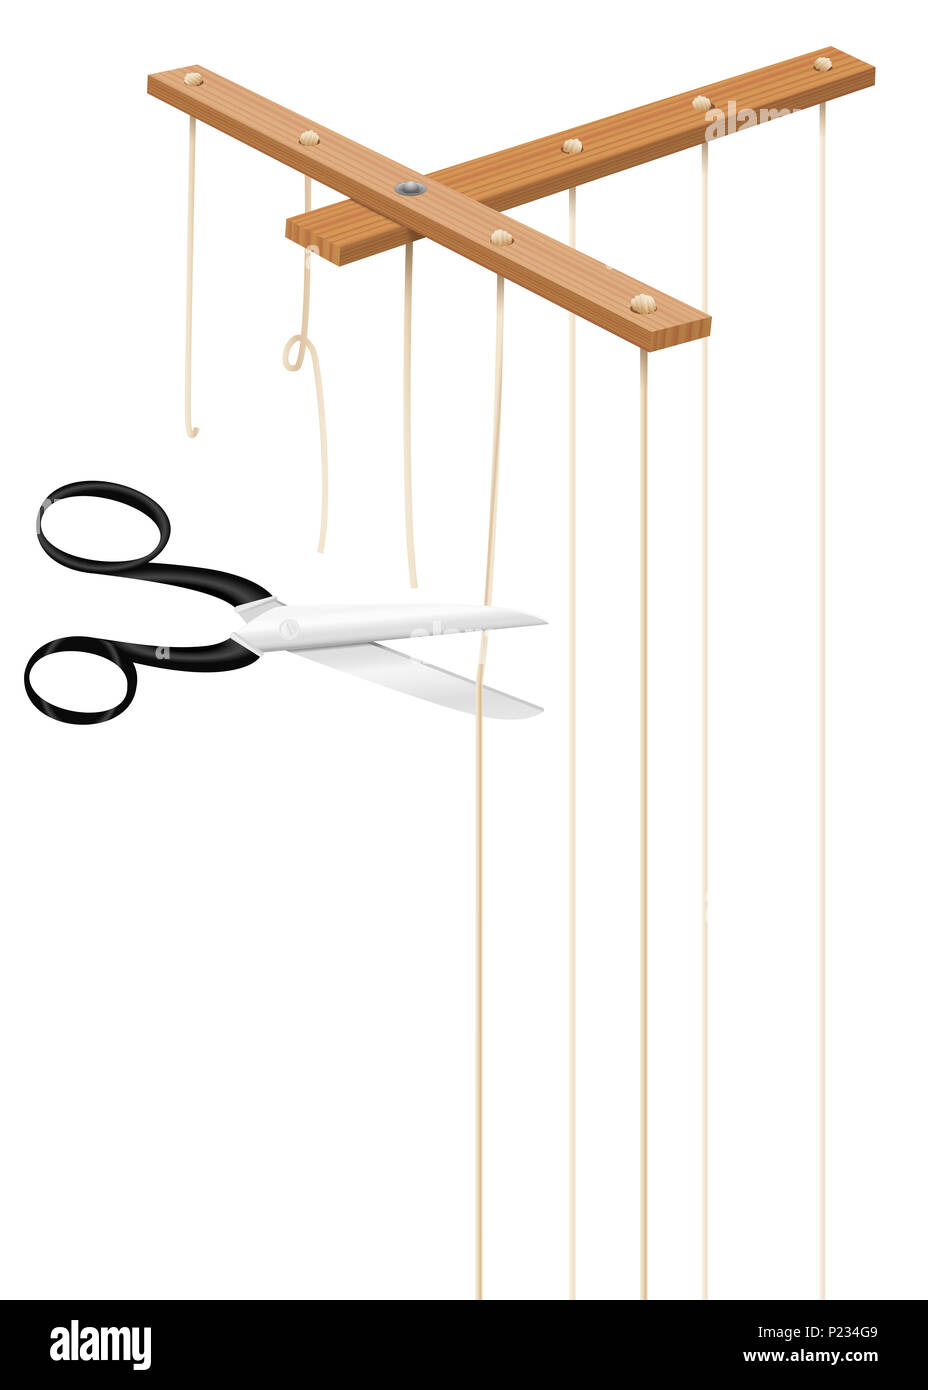 Scissors cuts strings of marionette control bar. Severed cords as a symbol for freedom, independence, emancipation, deliverance, liberation. Stock Photo